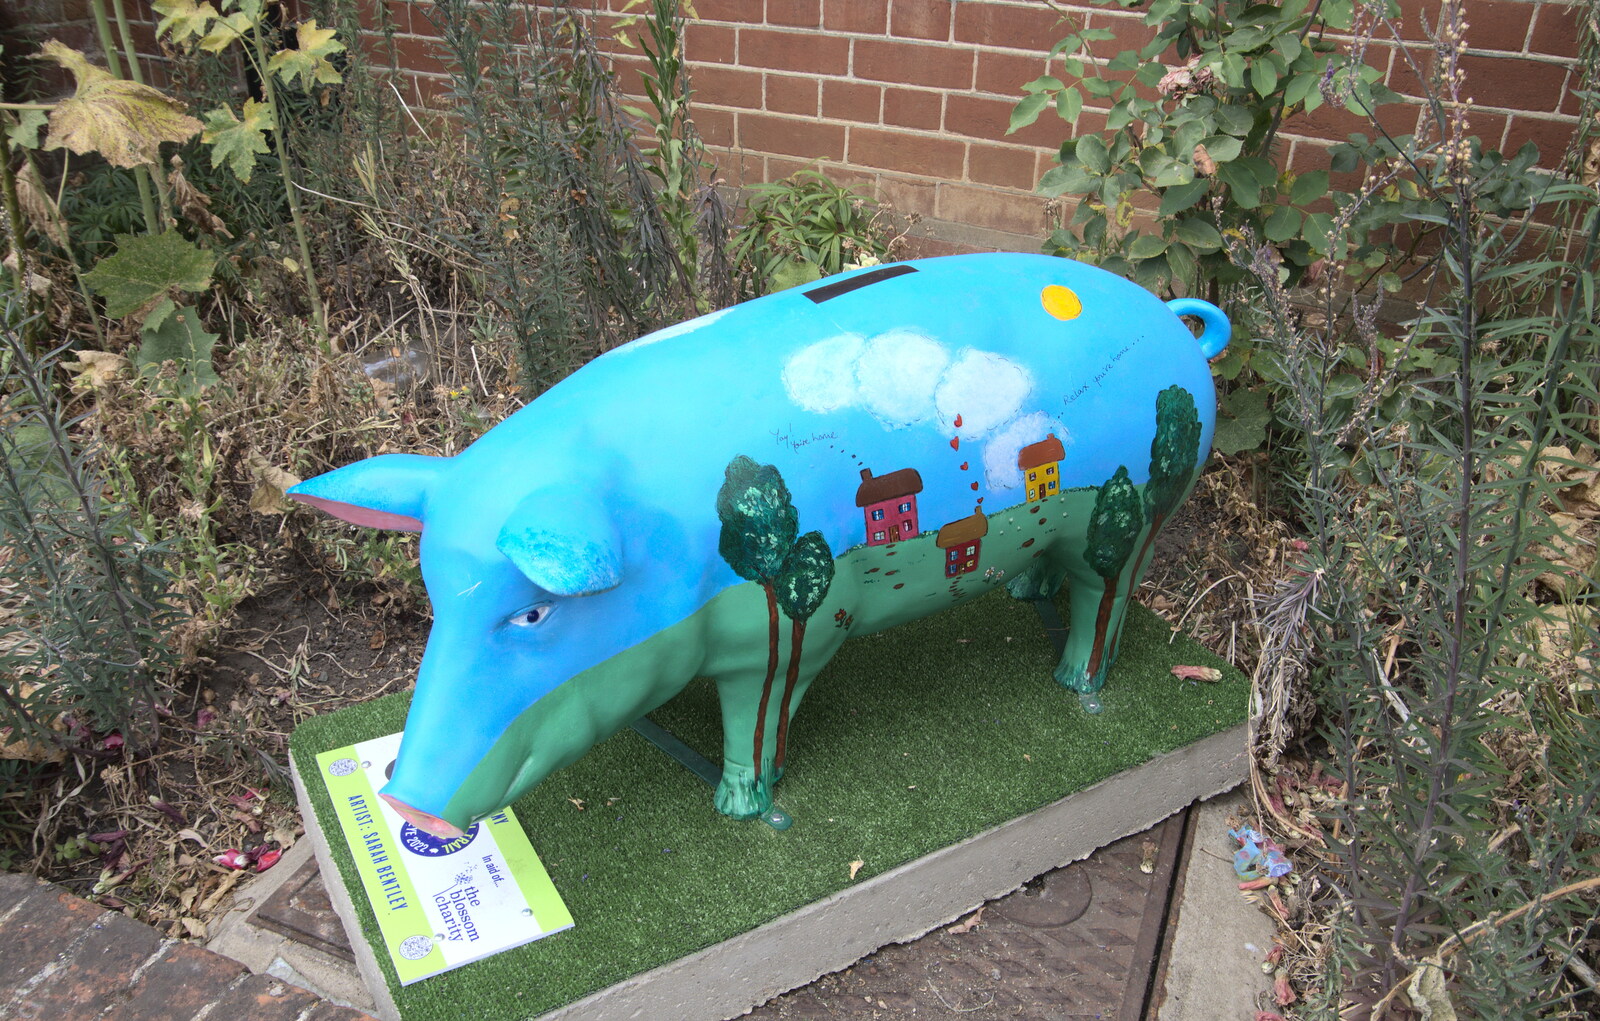 A July Miscellany, Diss, Eye and Norwich - 23rd July 2022: Sarah Bentley's pig